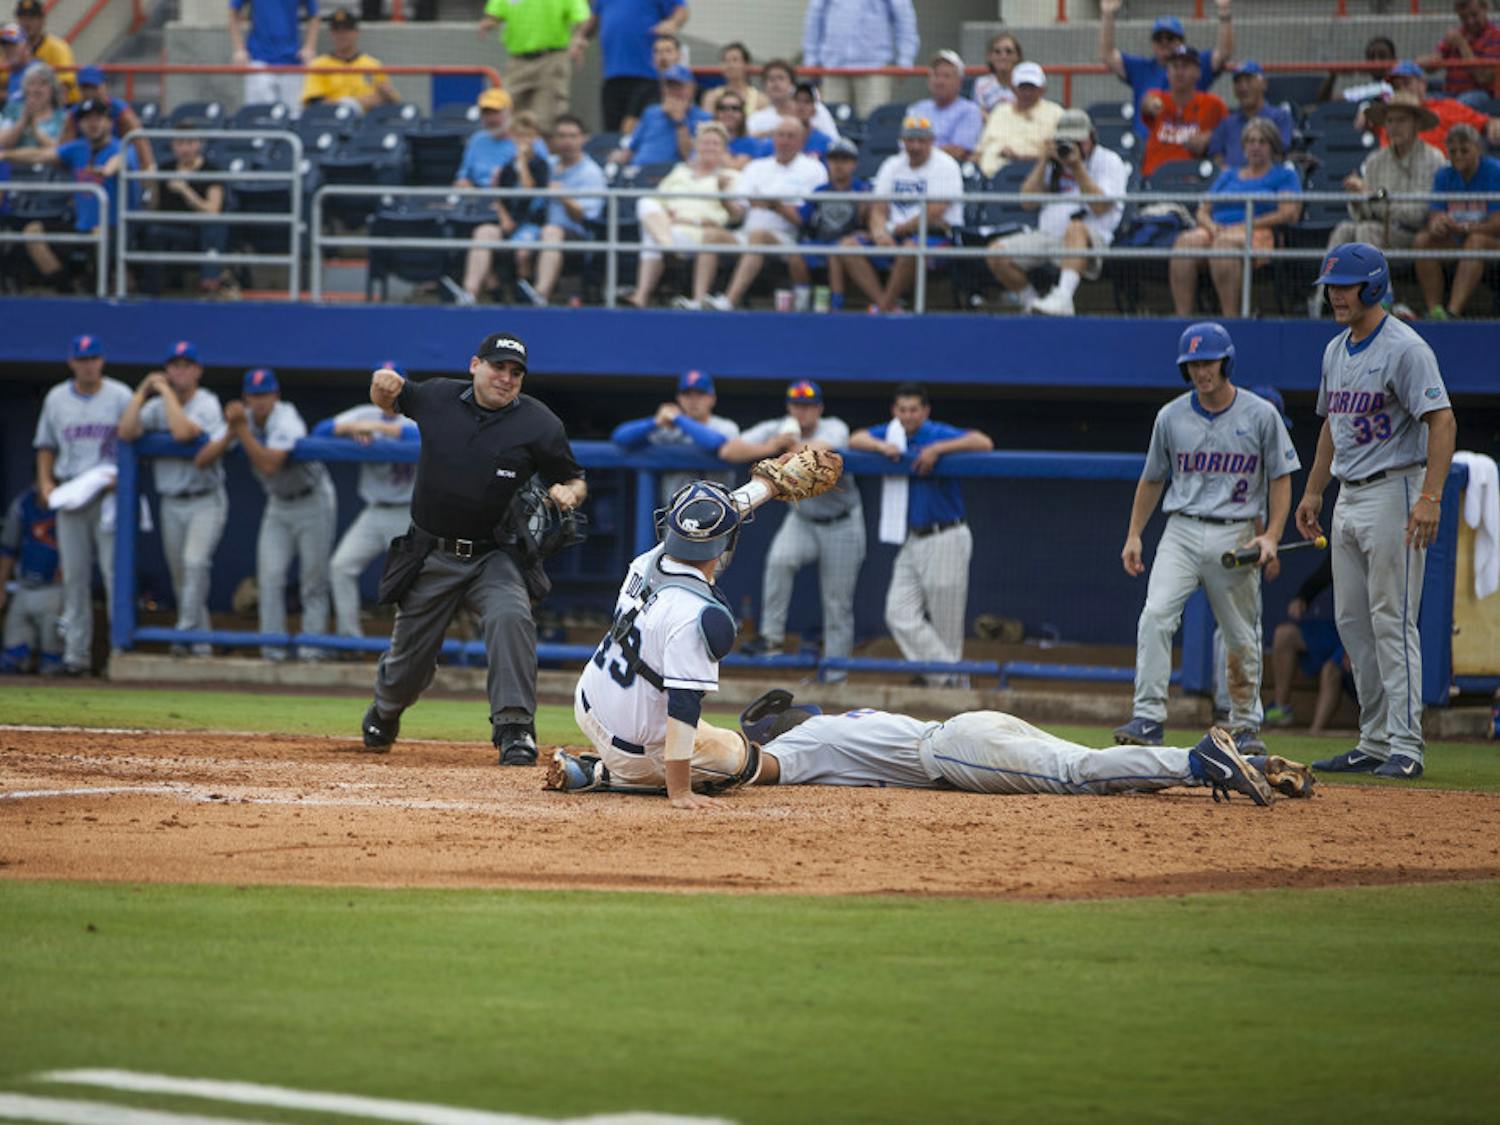 UF shortstop Richie Martin is tagged out at home plate by UNC catcher Korey Dunbar during Florida's 5-2 loss on Saturday at McKethan Stadium. The loss eliminated the Gators from the NCAA Tournament.